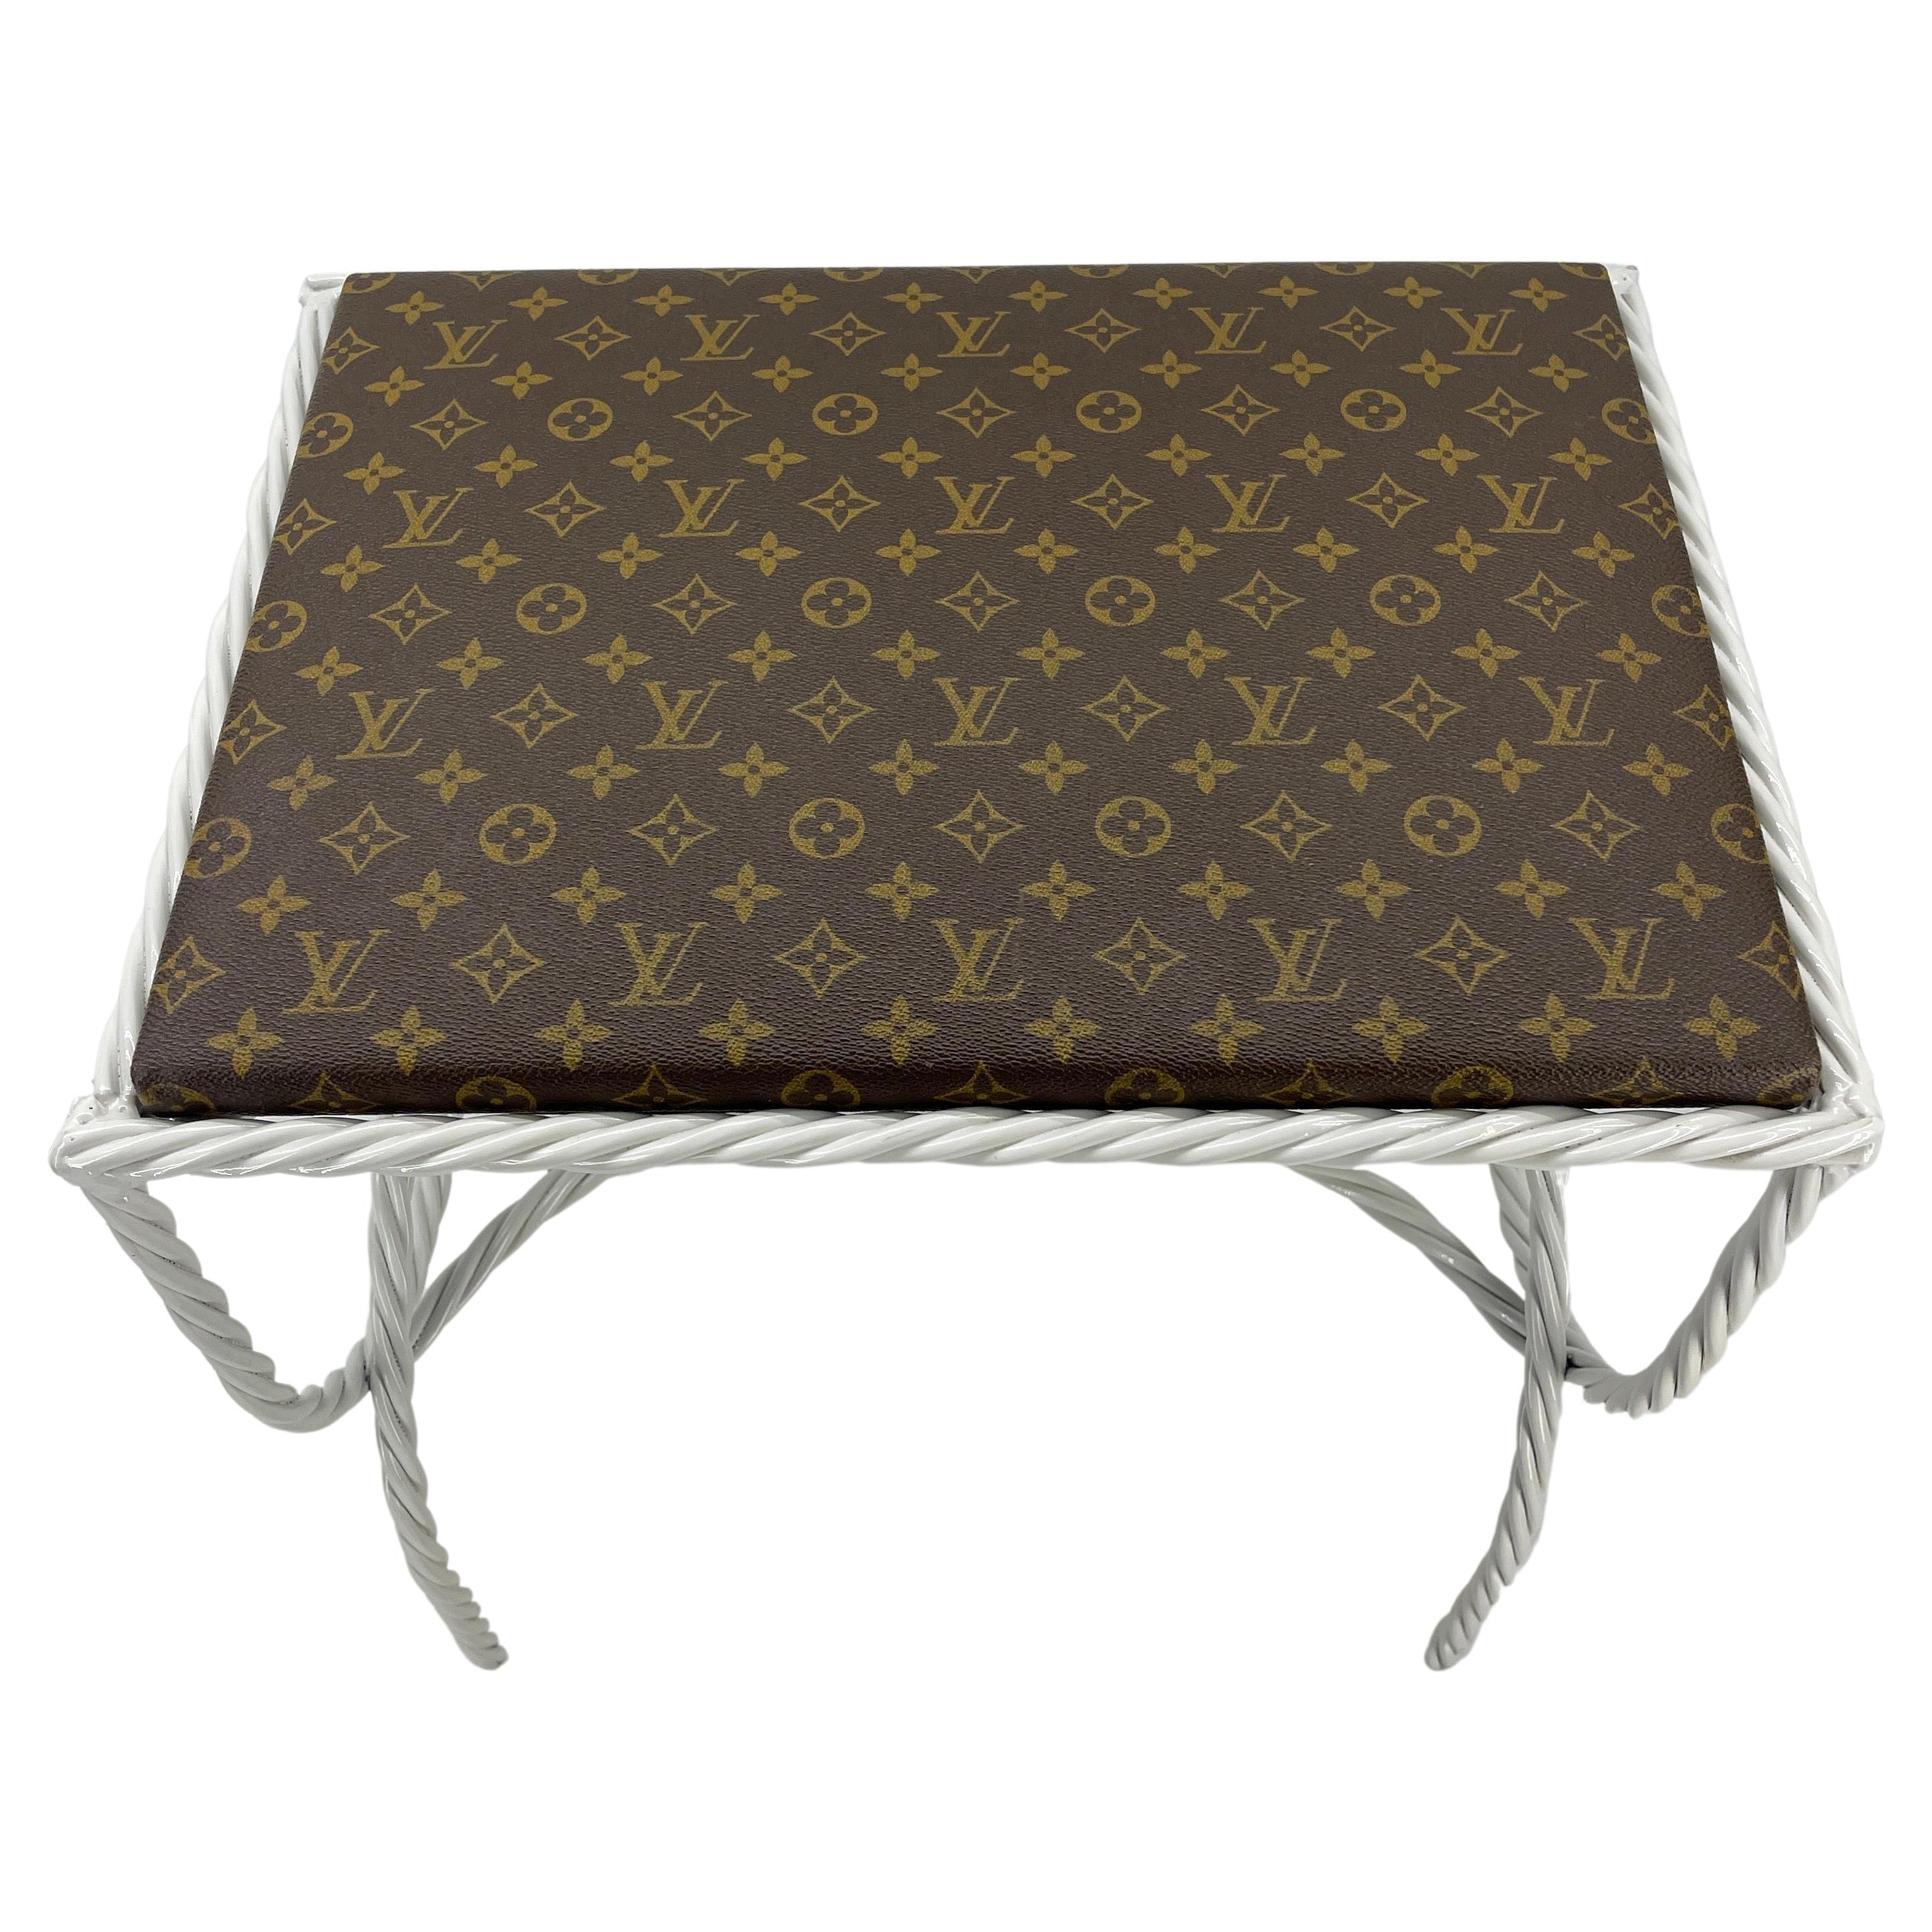 American Pair of Roped Iron Benches Side Tables with Louis Vuitton Monogram Fabric For Sale